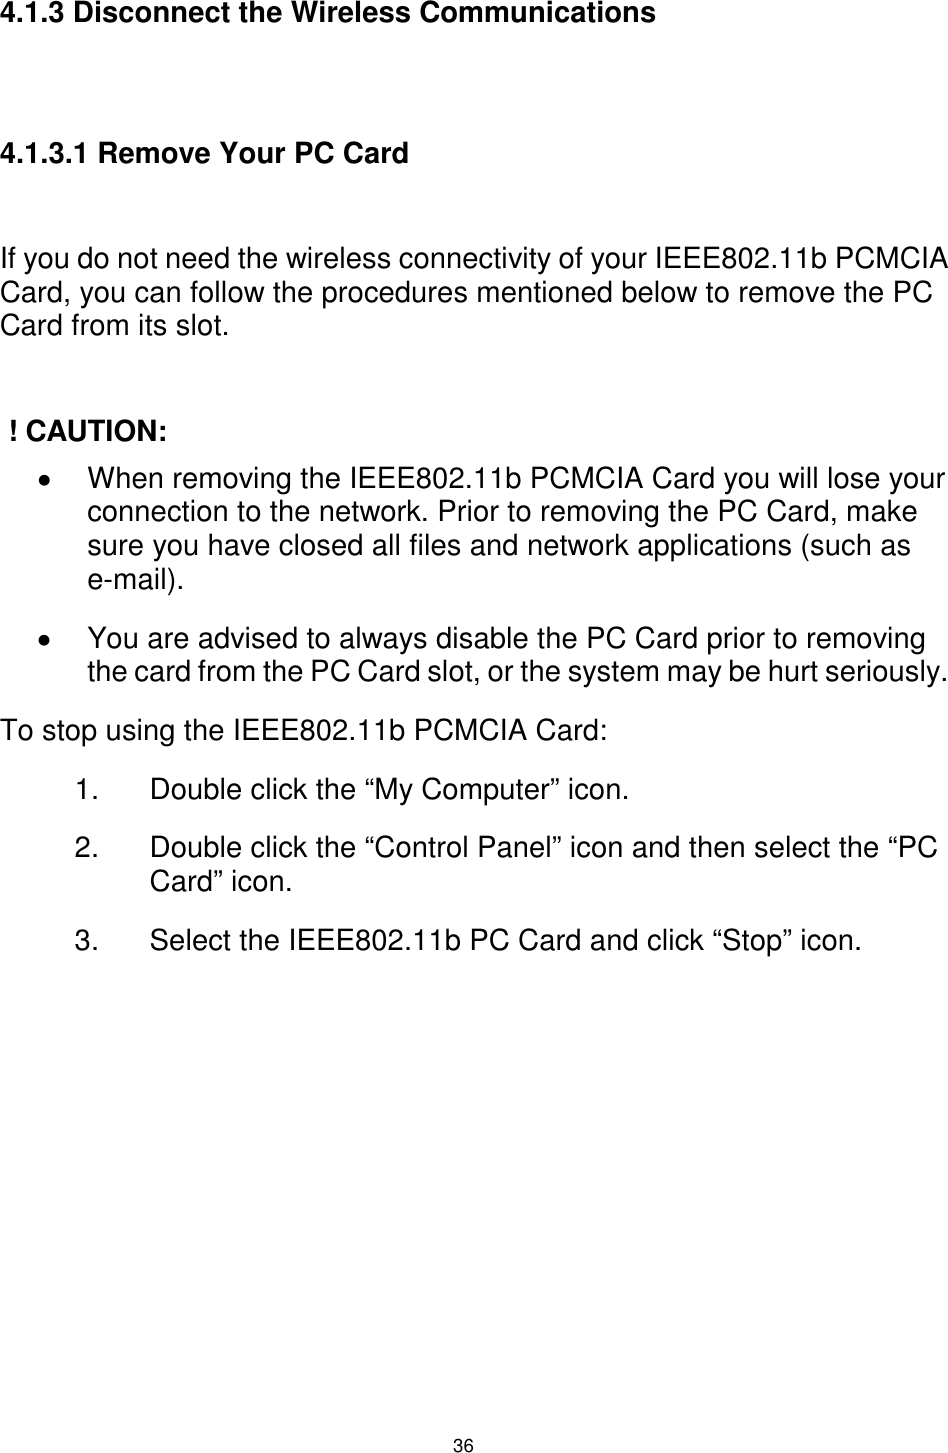  36 4.1.3 Disconnect the Wireless Communications   4.1.3.1 Remove Your PC Card  If you do not need the wireless connectivity of your IEEE802.11b PCMCIA Card, you can follow the procedures mentioned below to remove the PC Card from its slot.   ! CAUTION: !  When removing the IEEE802.11b PCMCIA Card you will lose your connection to the network. Prior to removing the PC Card, make sure you have closed all files and network applications (such as e-mail). !  You are advised to always disable the PC Card prior to removing the card from the PC Card slot, or the system may be hurt seriously. To stop using the IEEE802.11b PCMCIA Card: 1.  Double click the “My Computer” icon. 2.  Double click the “Control Panel” icon and then select the “PC Card” icon. 3.  Select the IEEE802.11b PC Card and click “Stop” icon.        